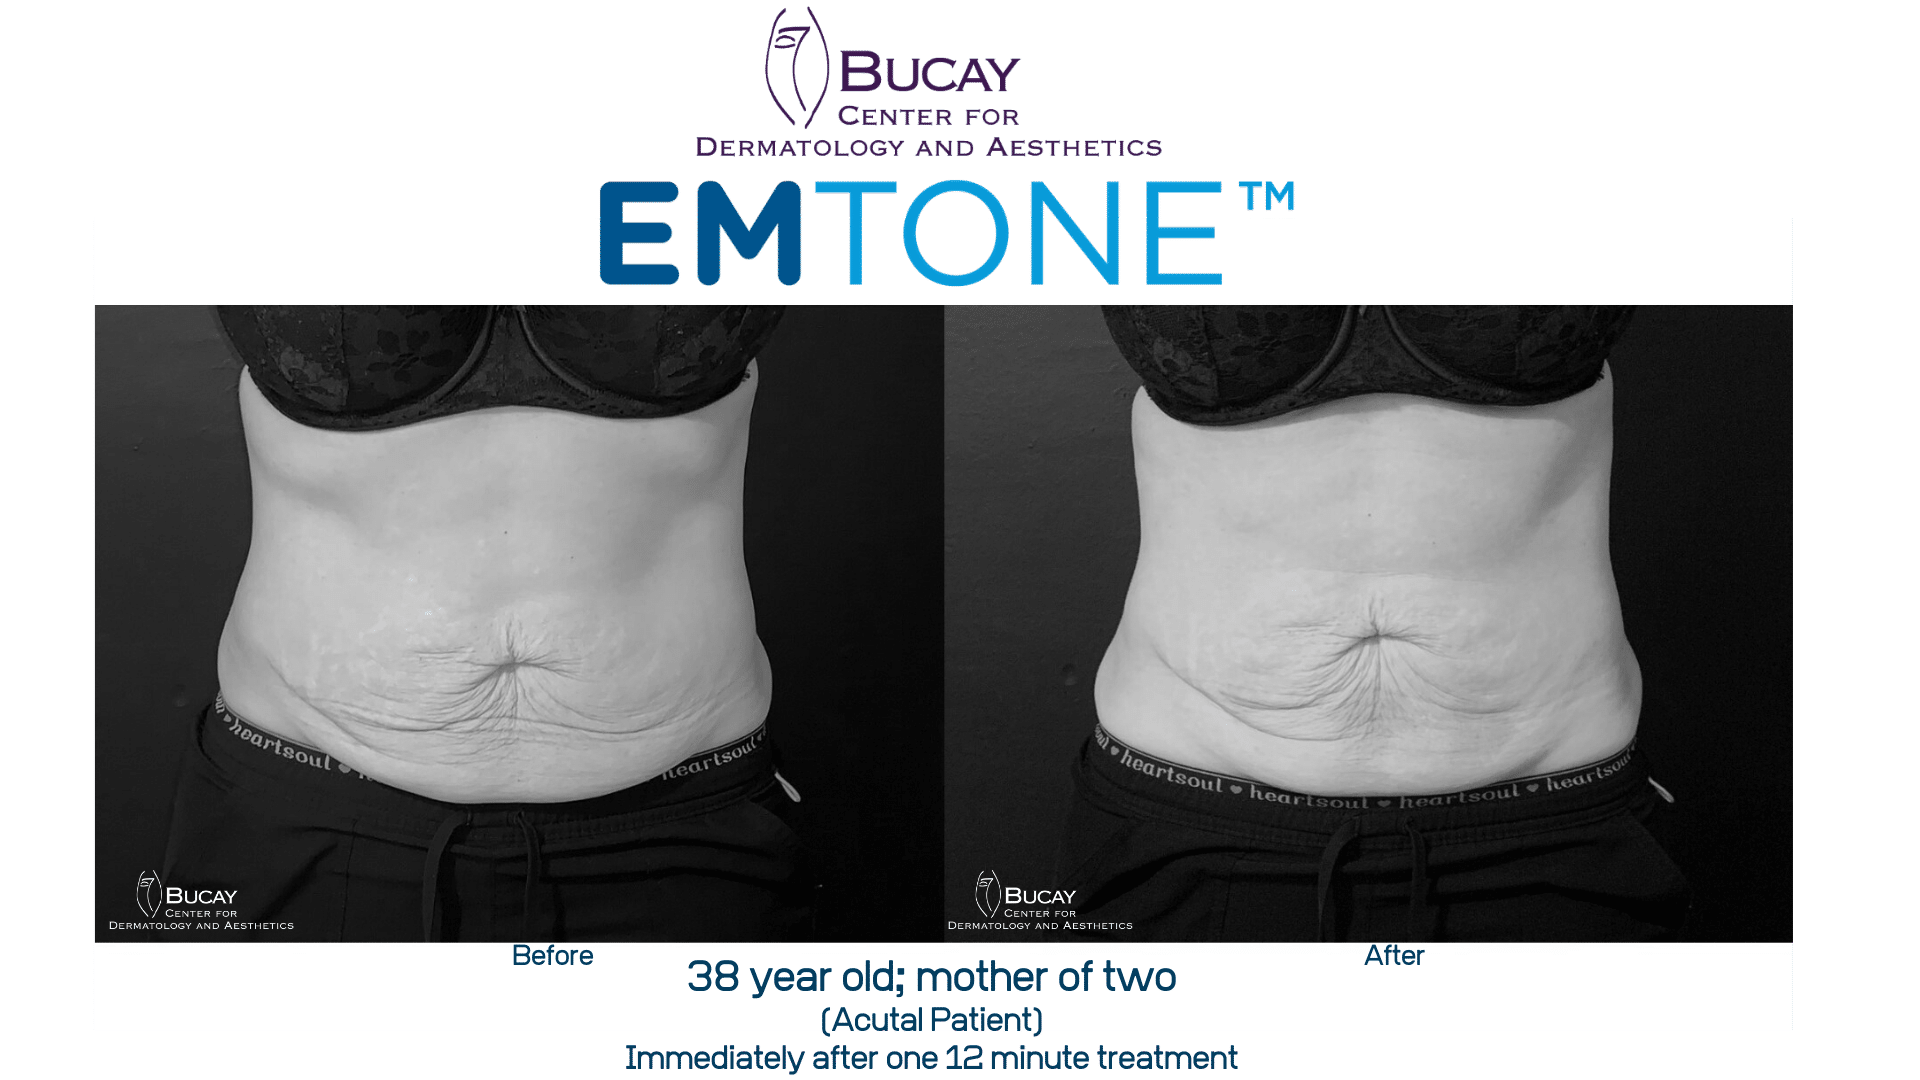 A before and after image set of a woman who recieved Emtone treatment on her abdomen